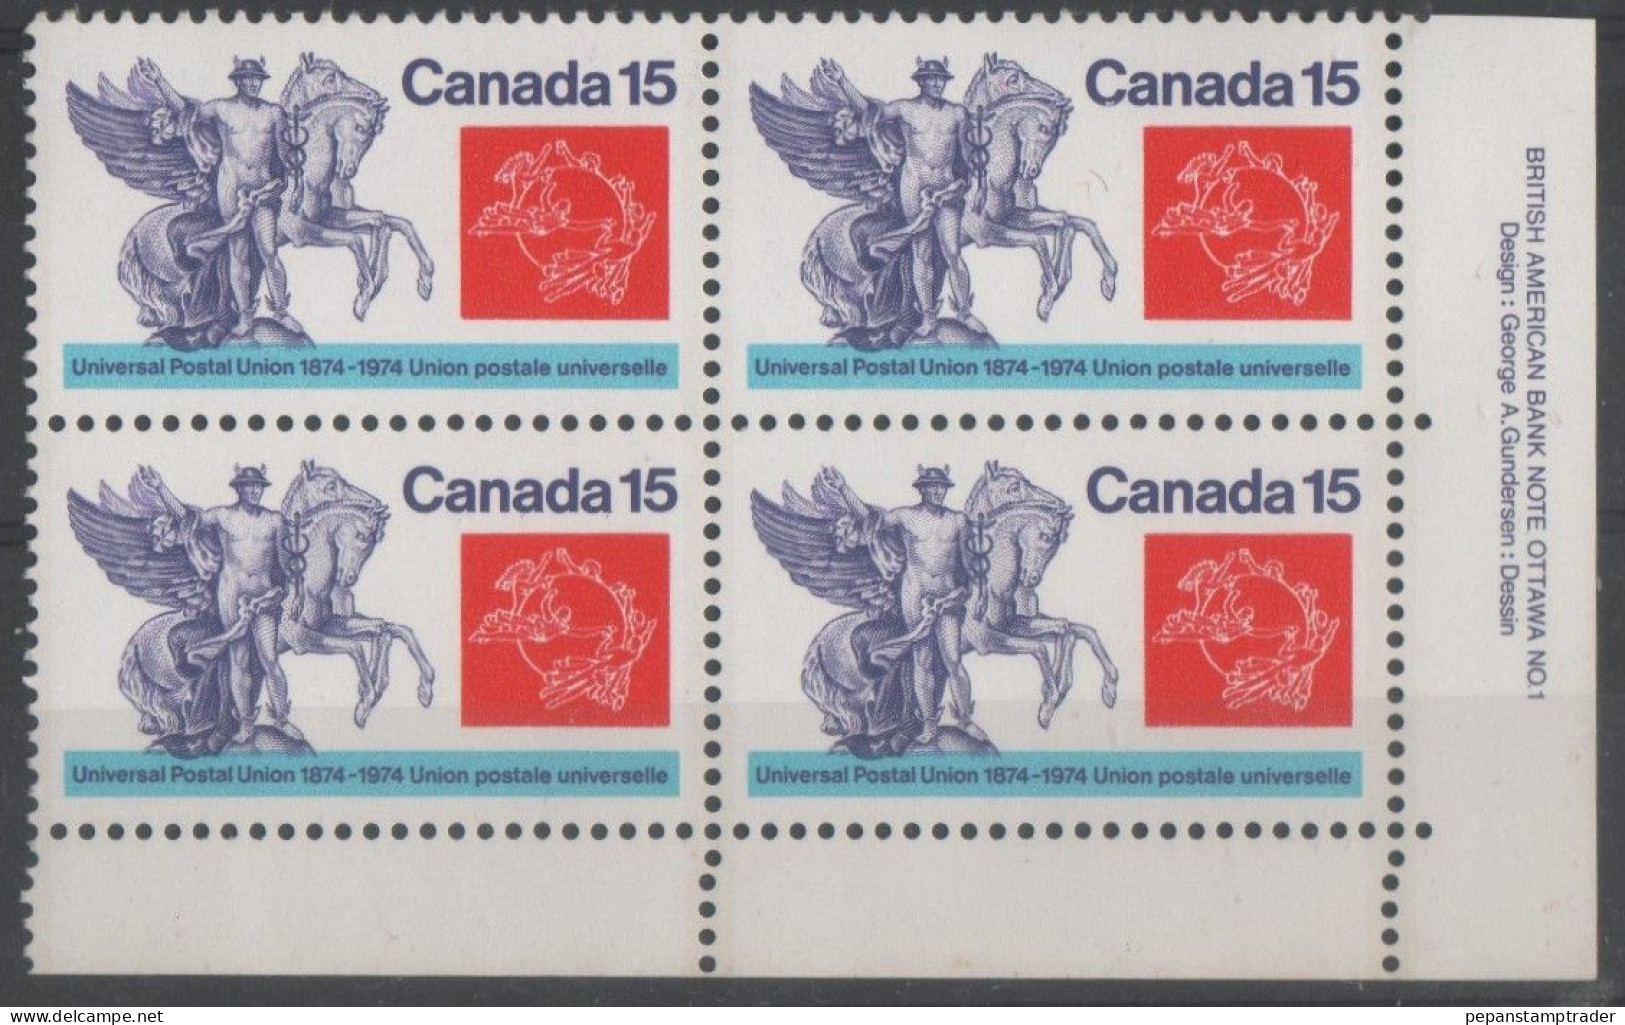 Canada - #649 - MNH PB - Plate Number & Inscriptions